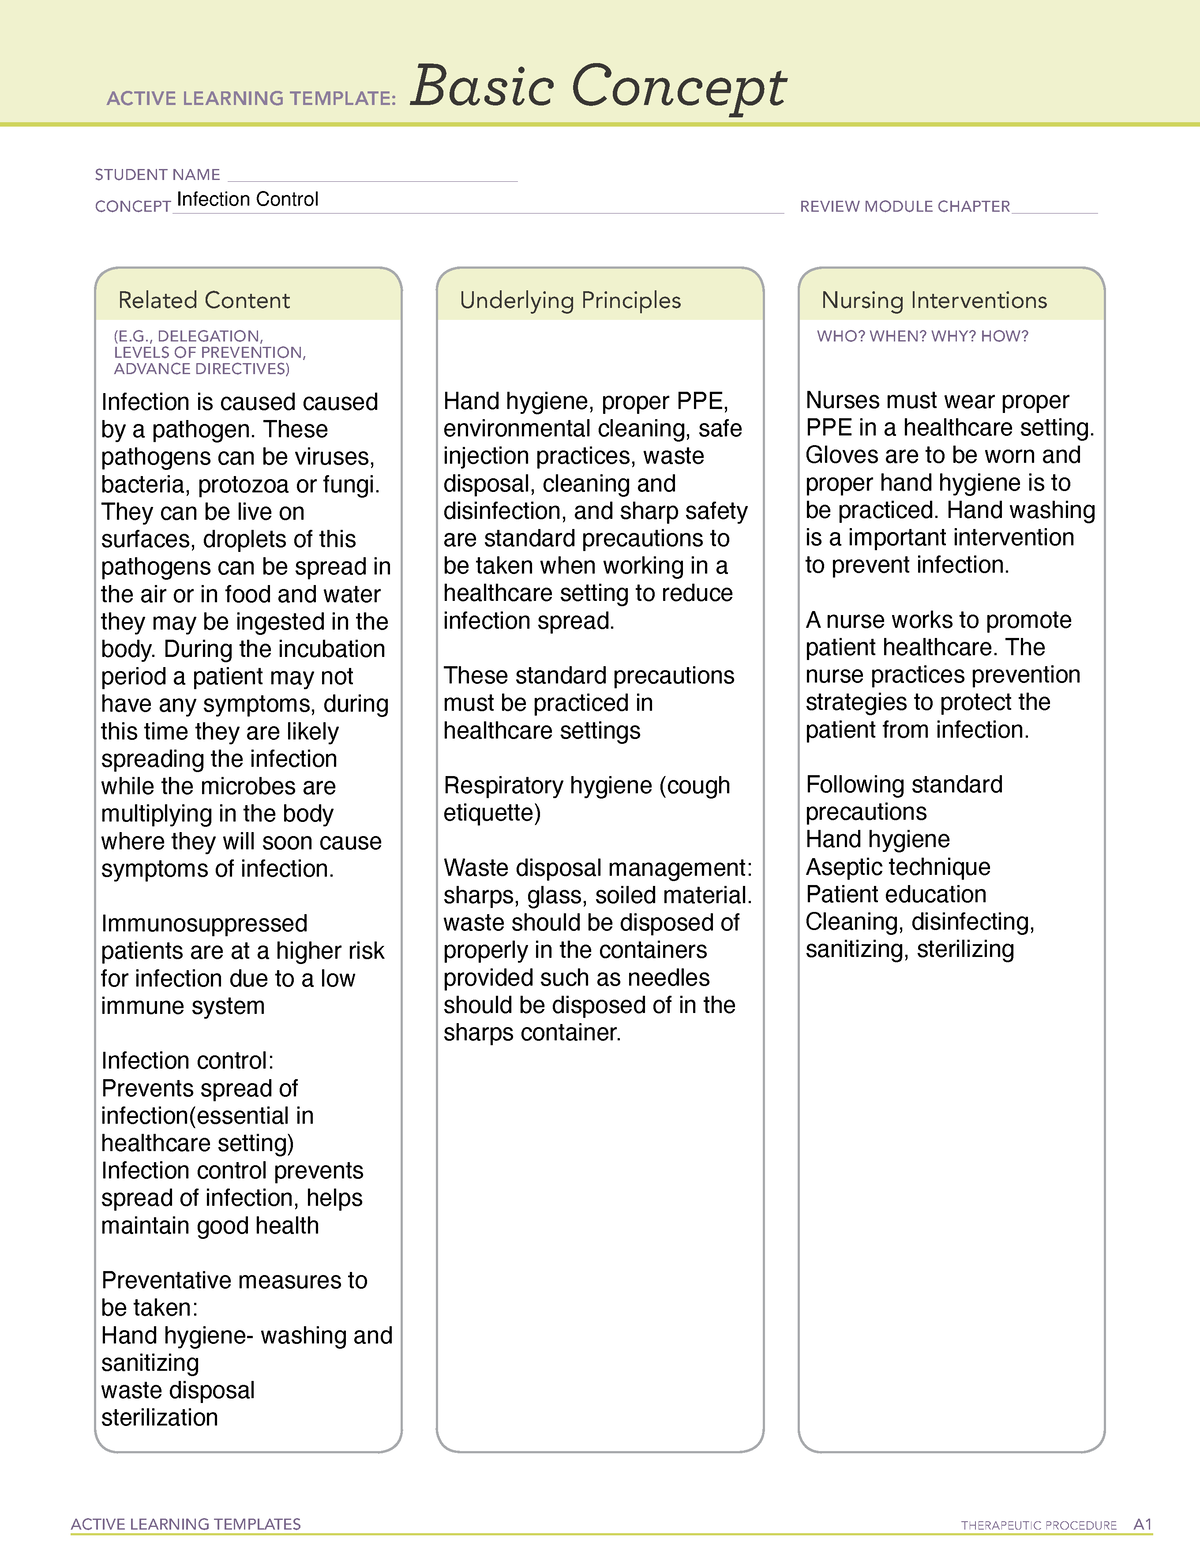 Basic concept infection control Patho ACTIVE LEARNING TEMPLATES